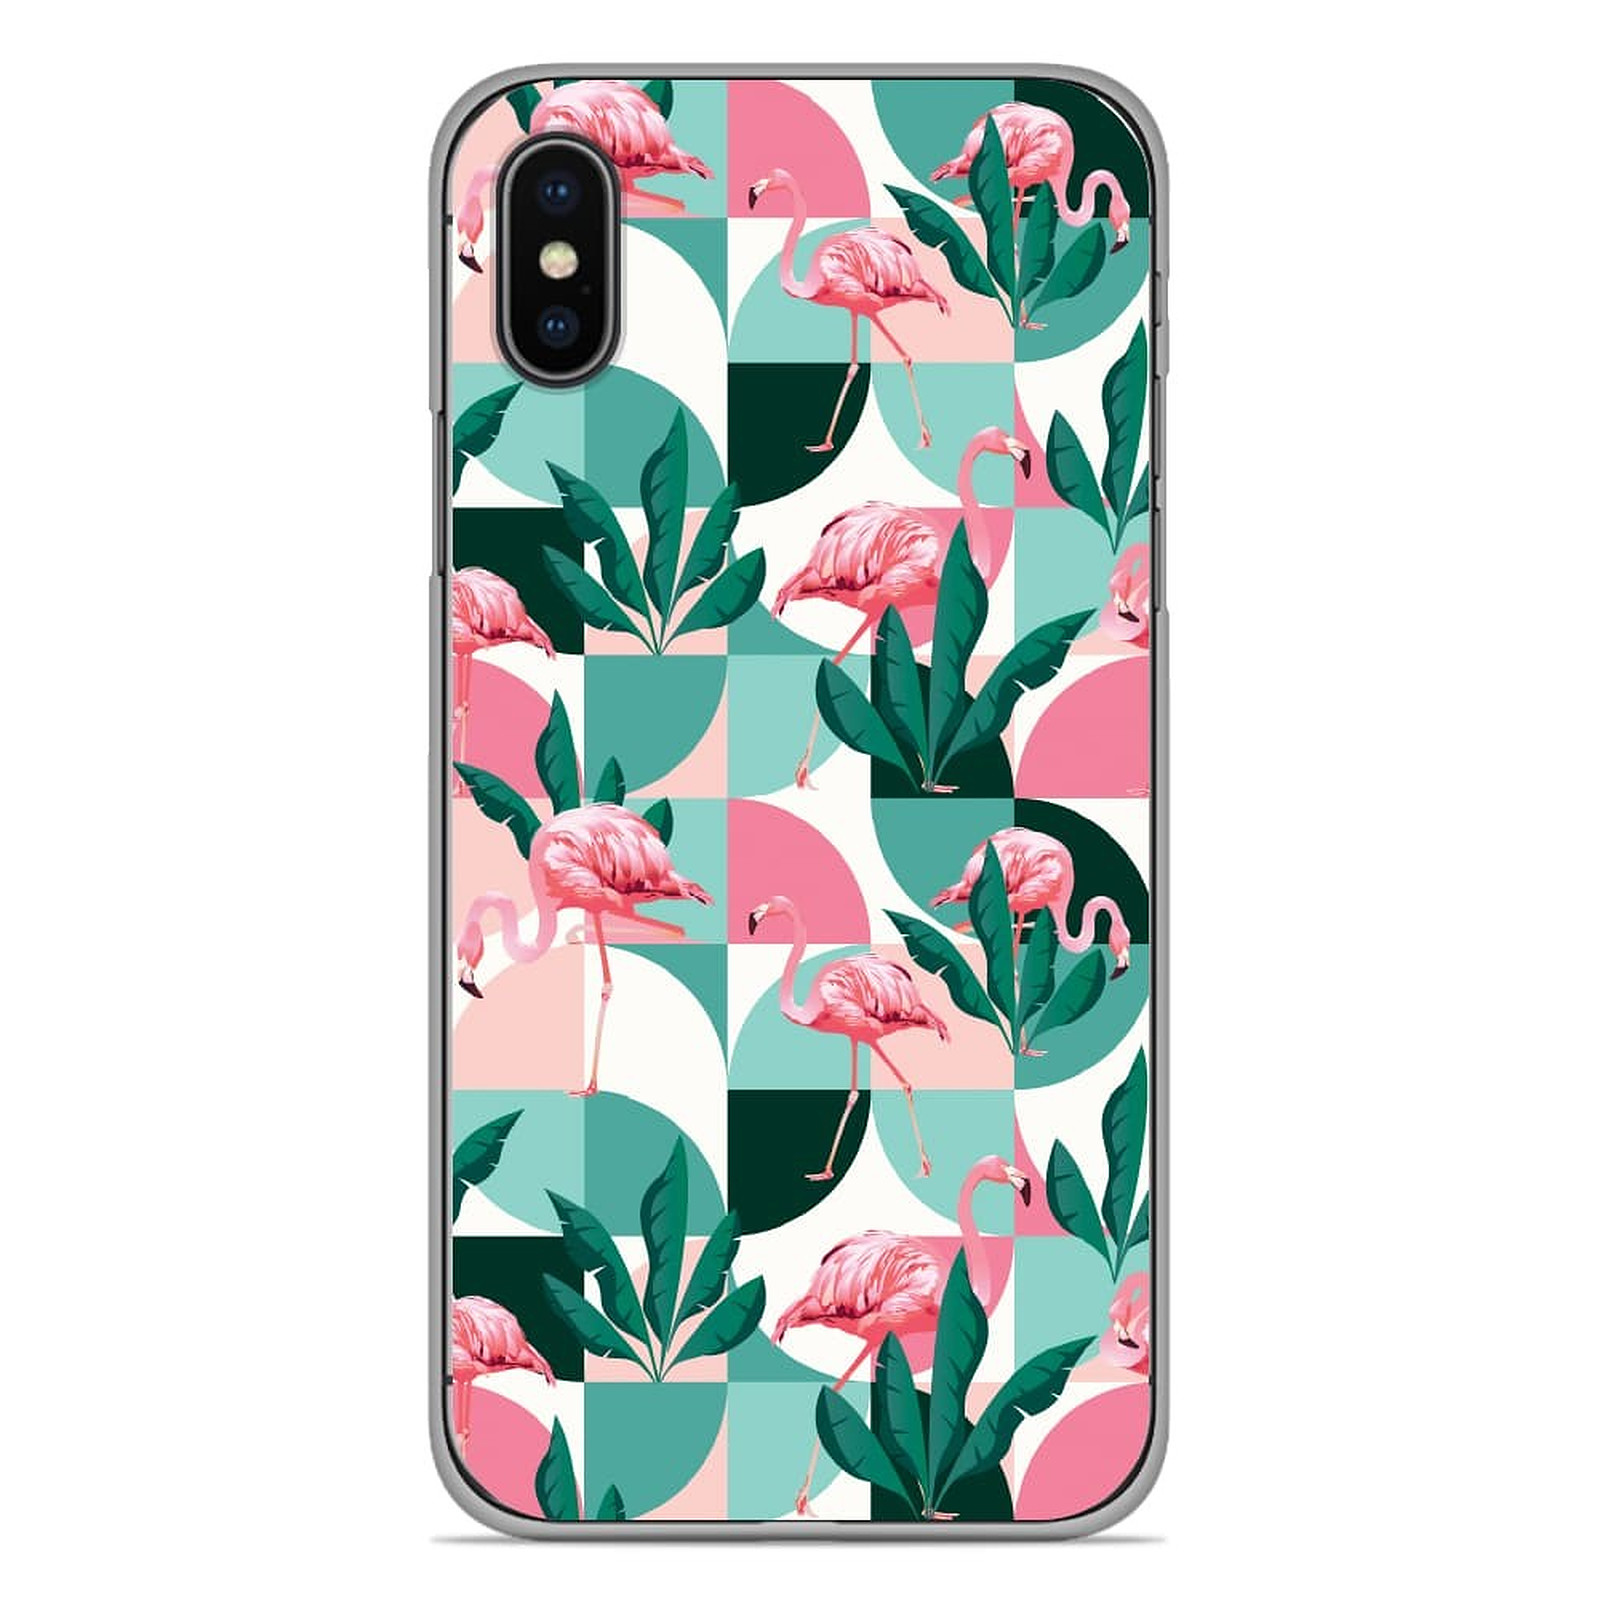 1001 Coques Coque silicone gel Apple iPhone XS Max motif Flamants Roses ge´ome´trique - Coque telephone 1001Coques